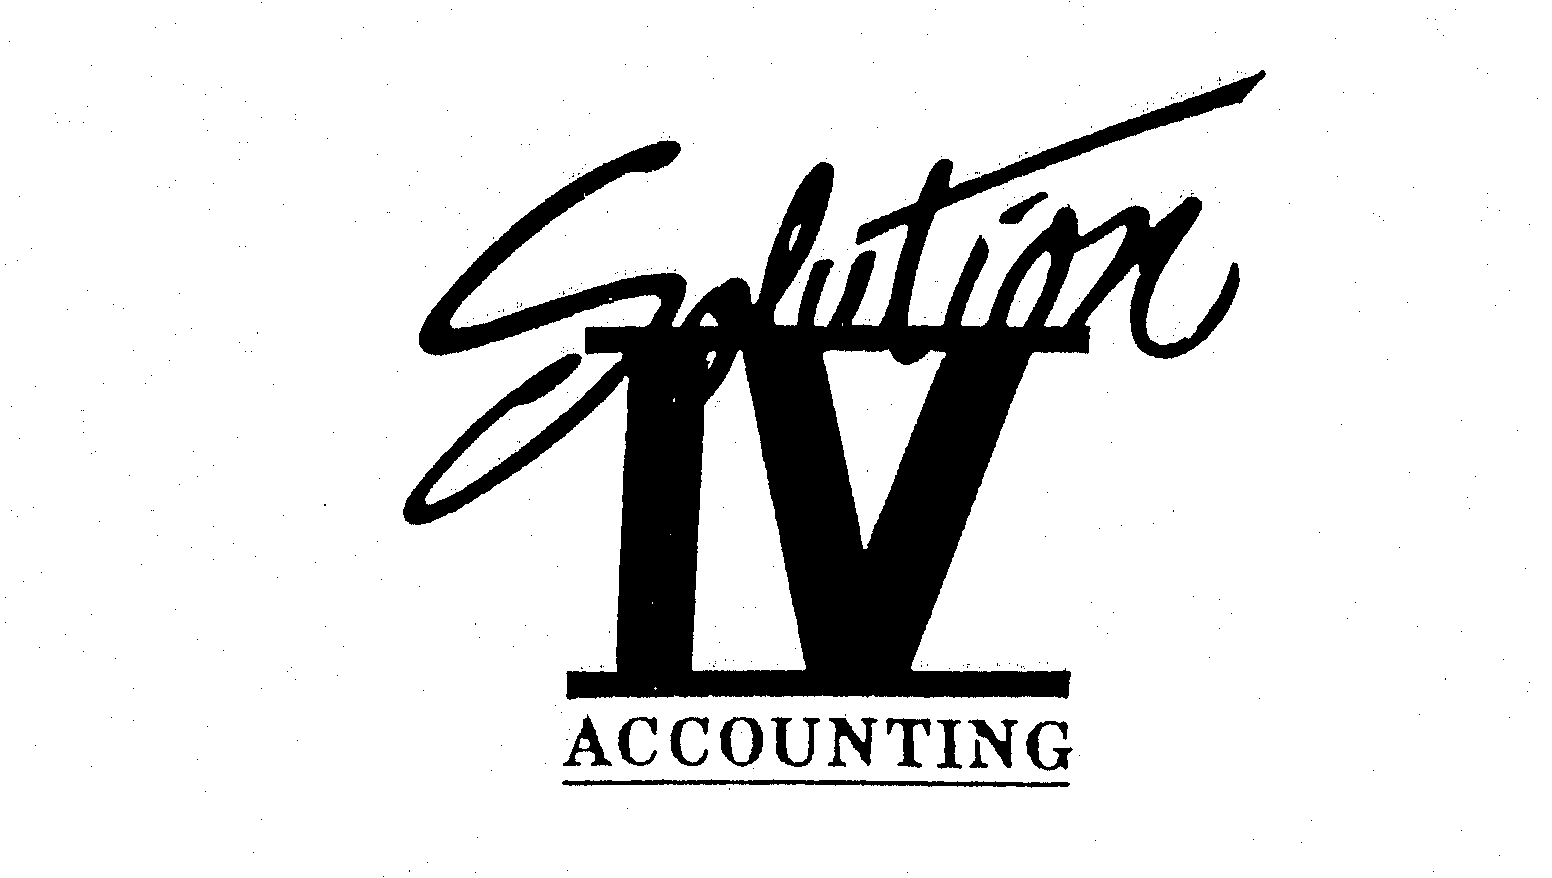  SOLUTION IV ACCOUNTING